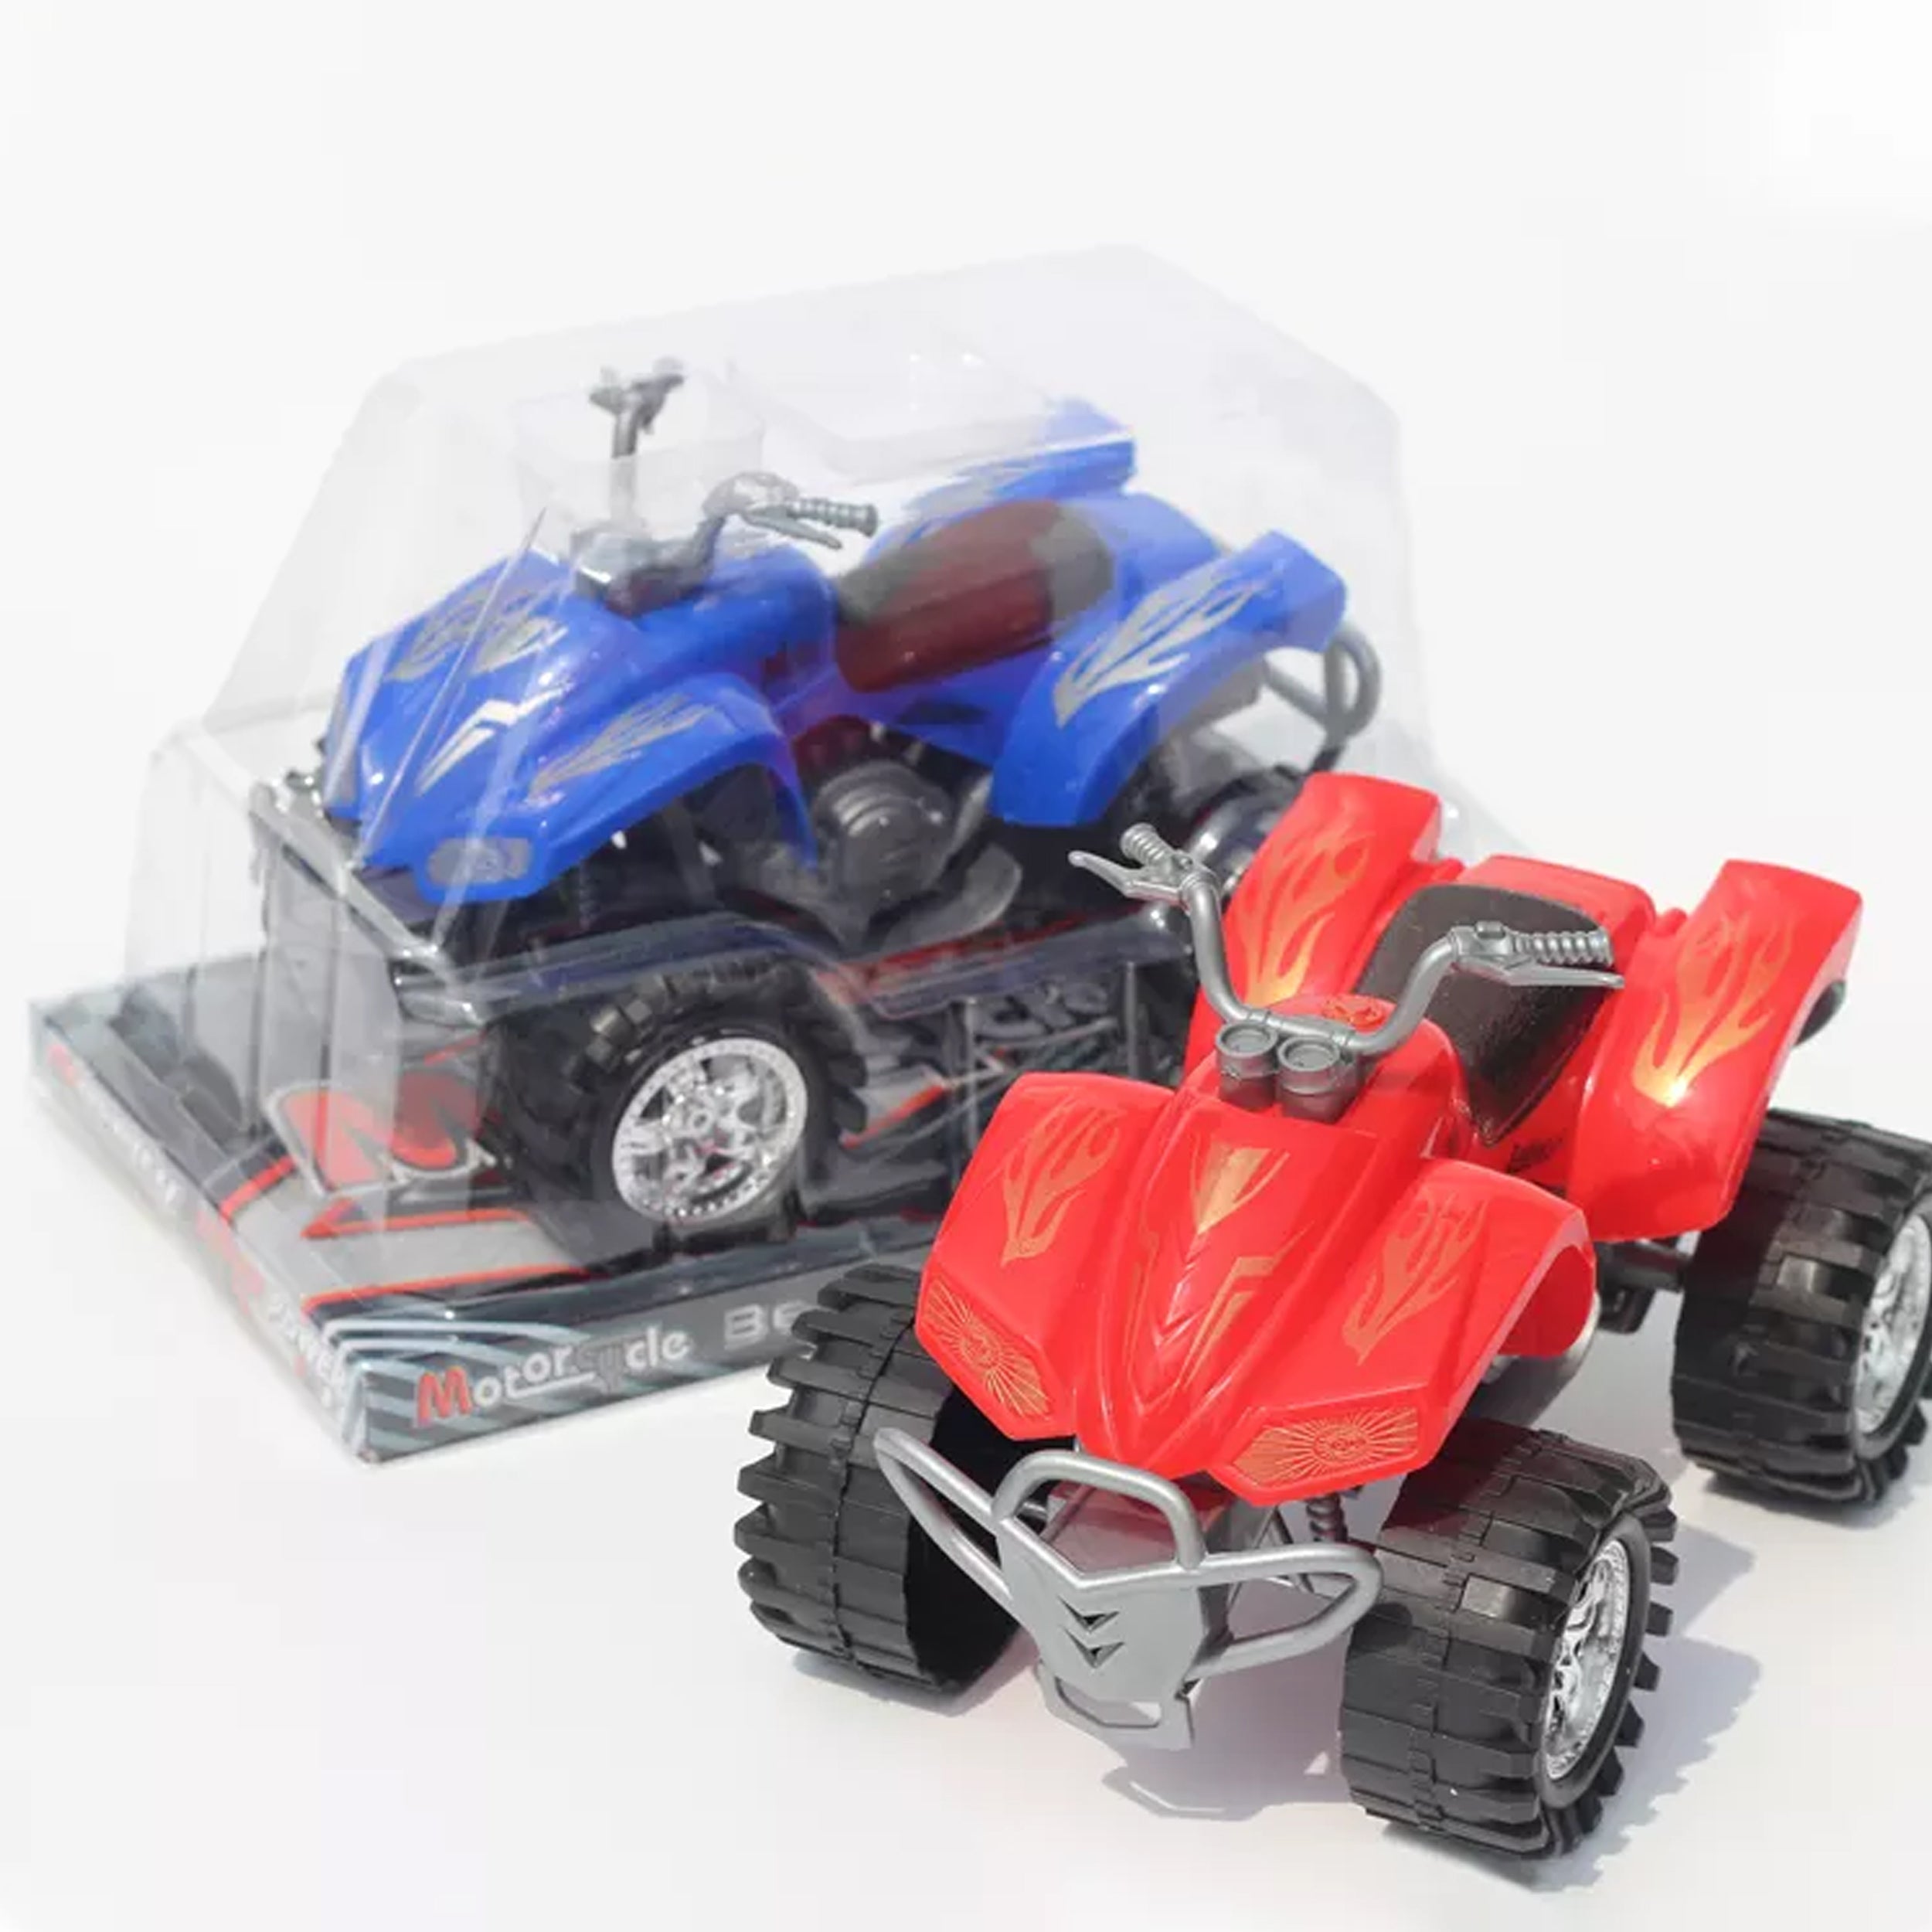 Frictional Power Play Motorcycle Cars for Toddlers & Kids - Entertaining and Engaging Playtime for Little Ones